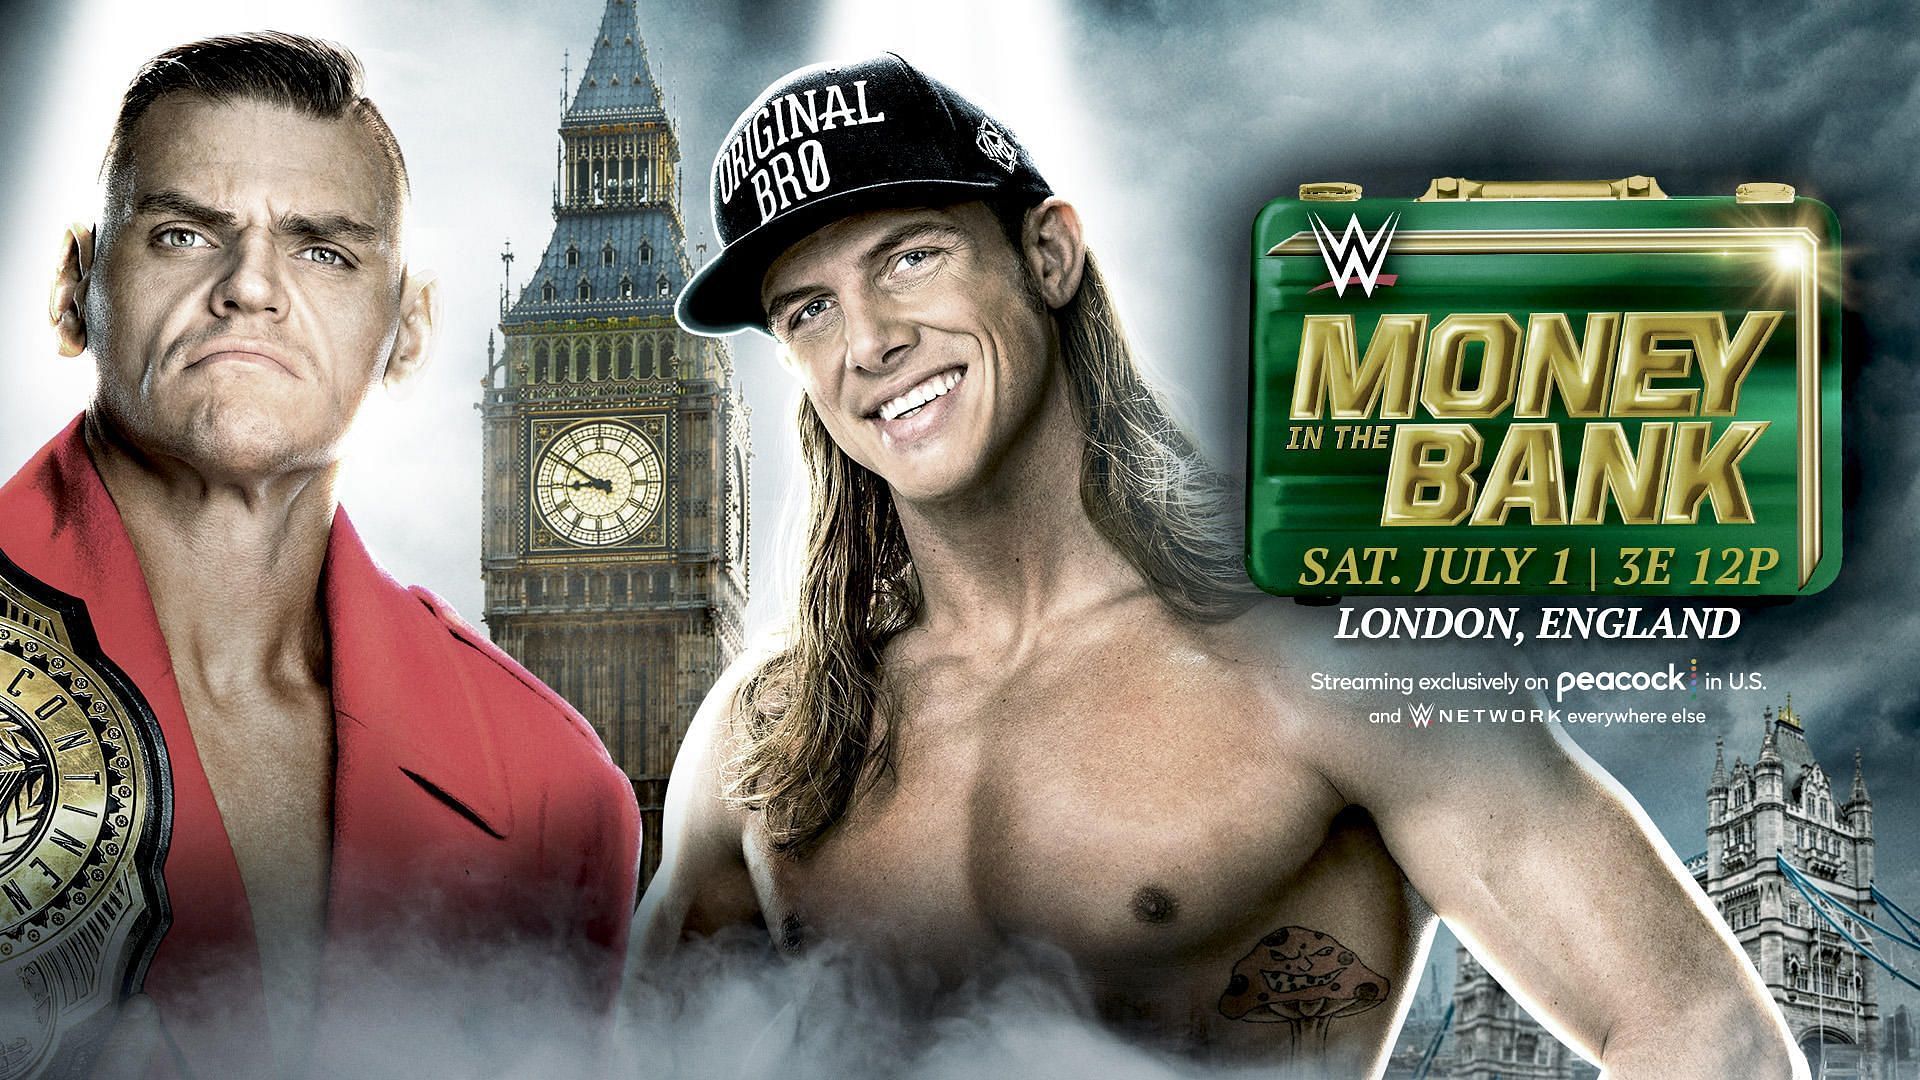 Some surprises may be in store for this massive Money in the Bank title match.